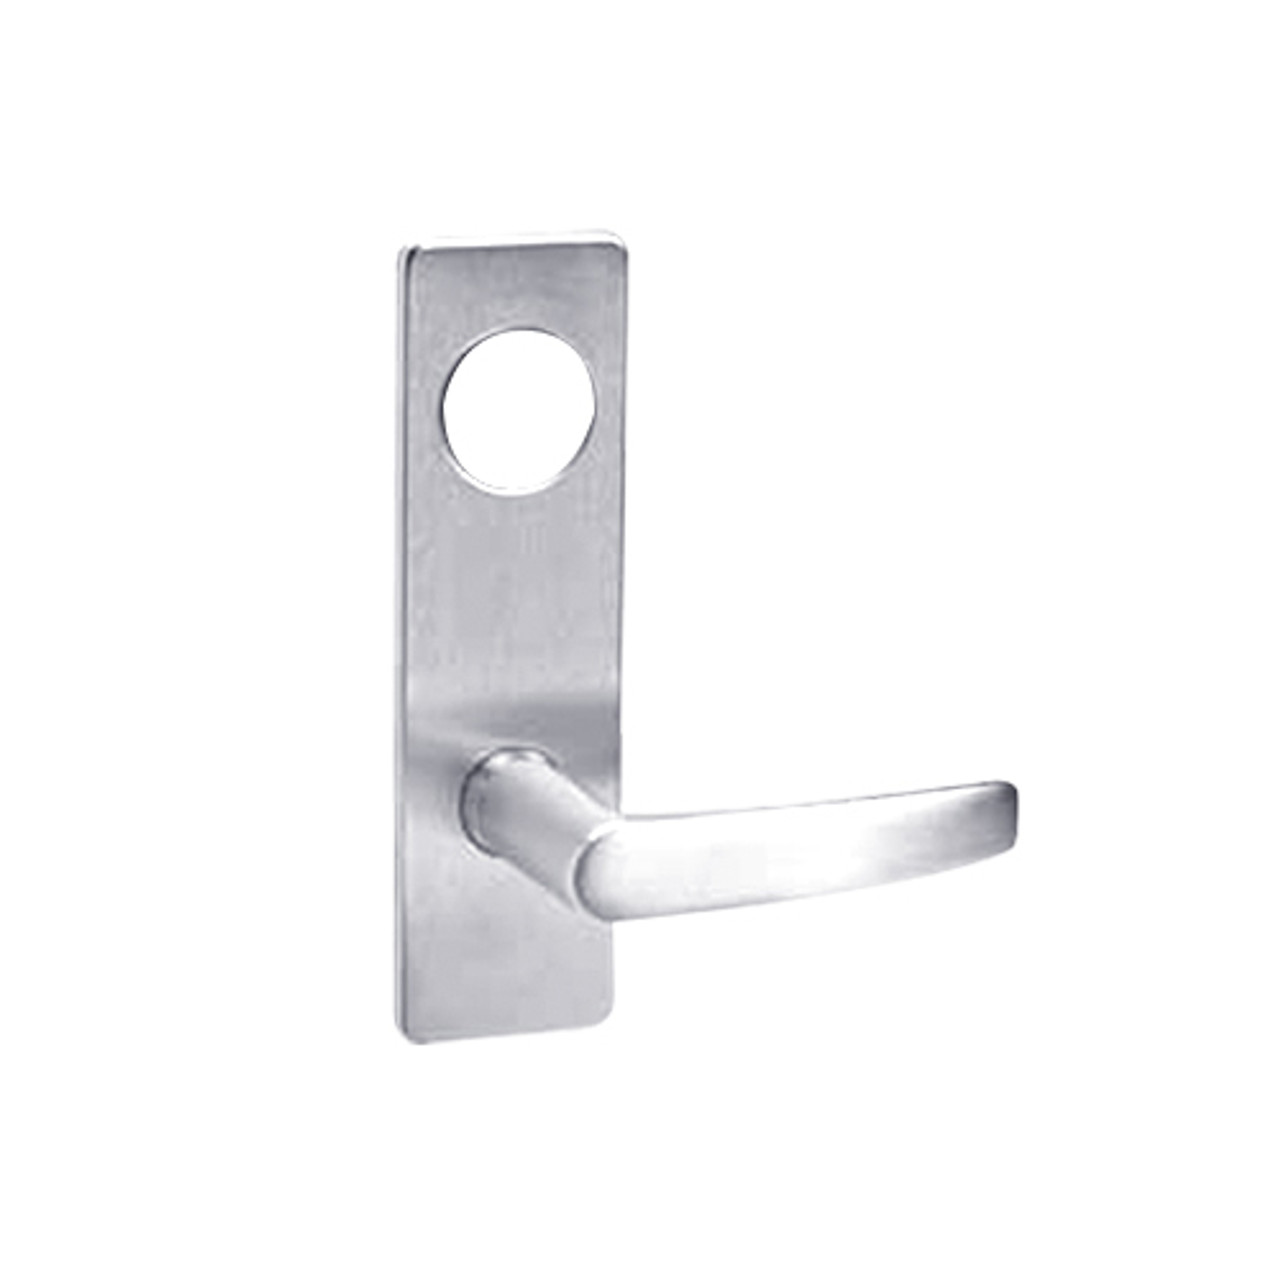 ML2048-ASM-625-M31 Corbin Russwin ML2000 Series Mortise Entrance Trim Pack with Armstrong Lever in Bright Chrome